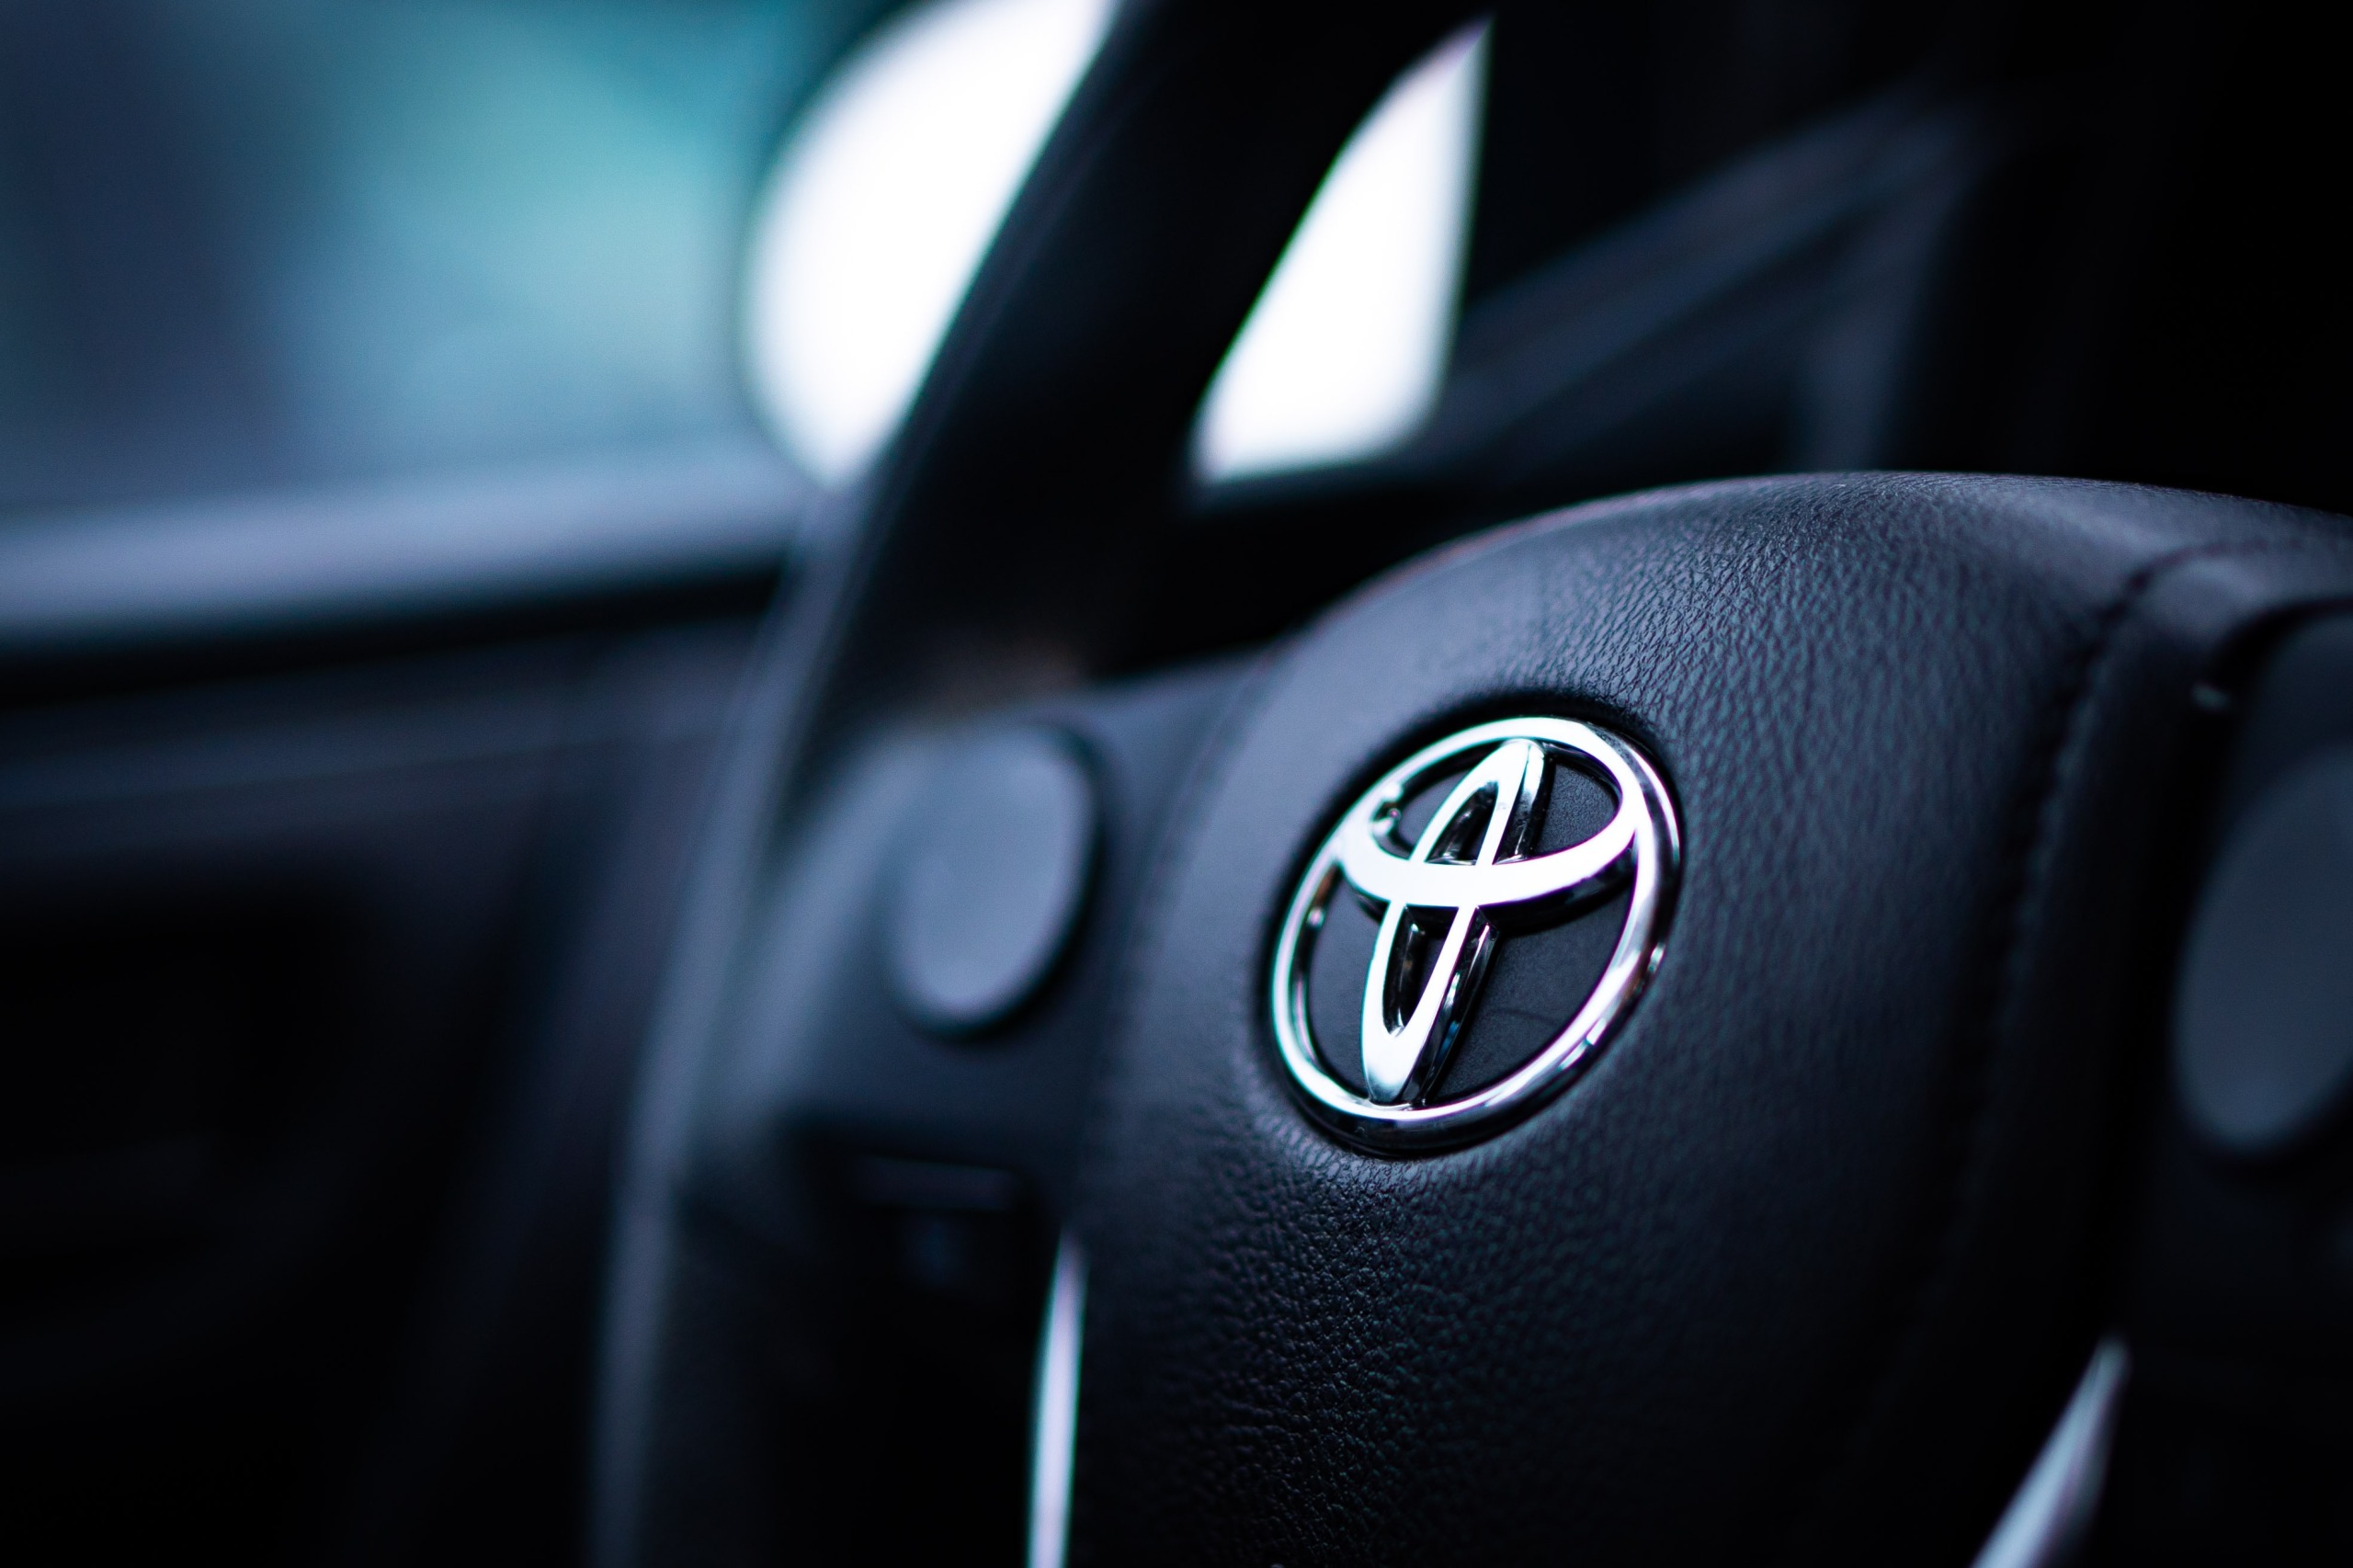 toyota-15-years-ahead-of-schedule-to-achieve-decarbonization-target